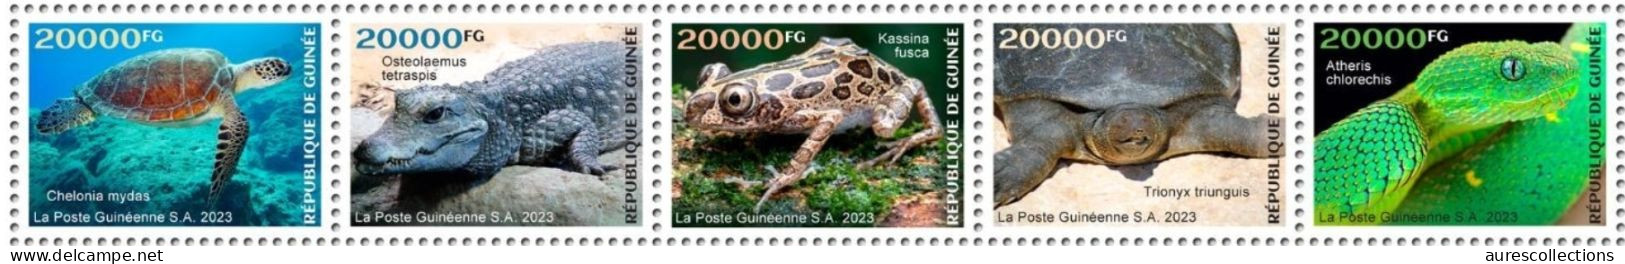 GUINEA GUINEE 2023 STRIP 5V - REPTILES FROGS TURTLES TURTLE CROCODILES SNAKES TORTUES SERPENTS - MNH - Rane